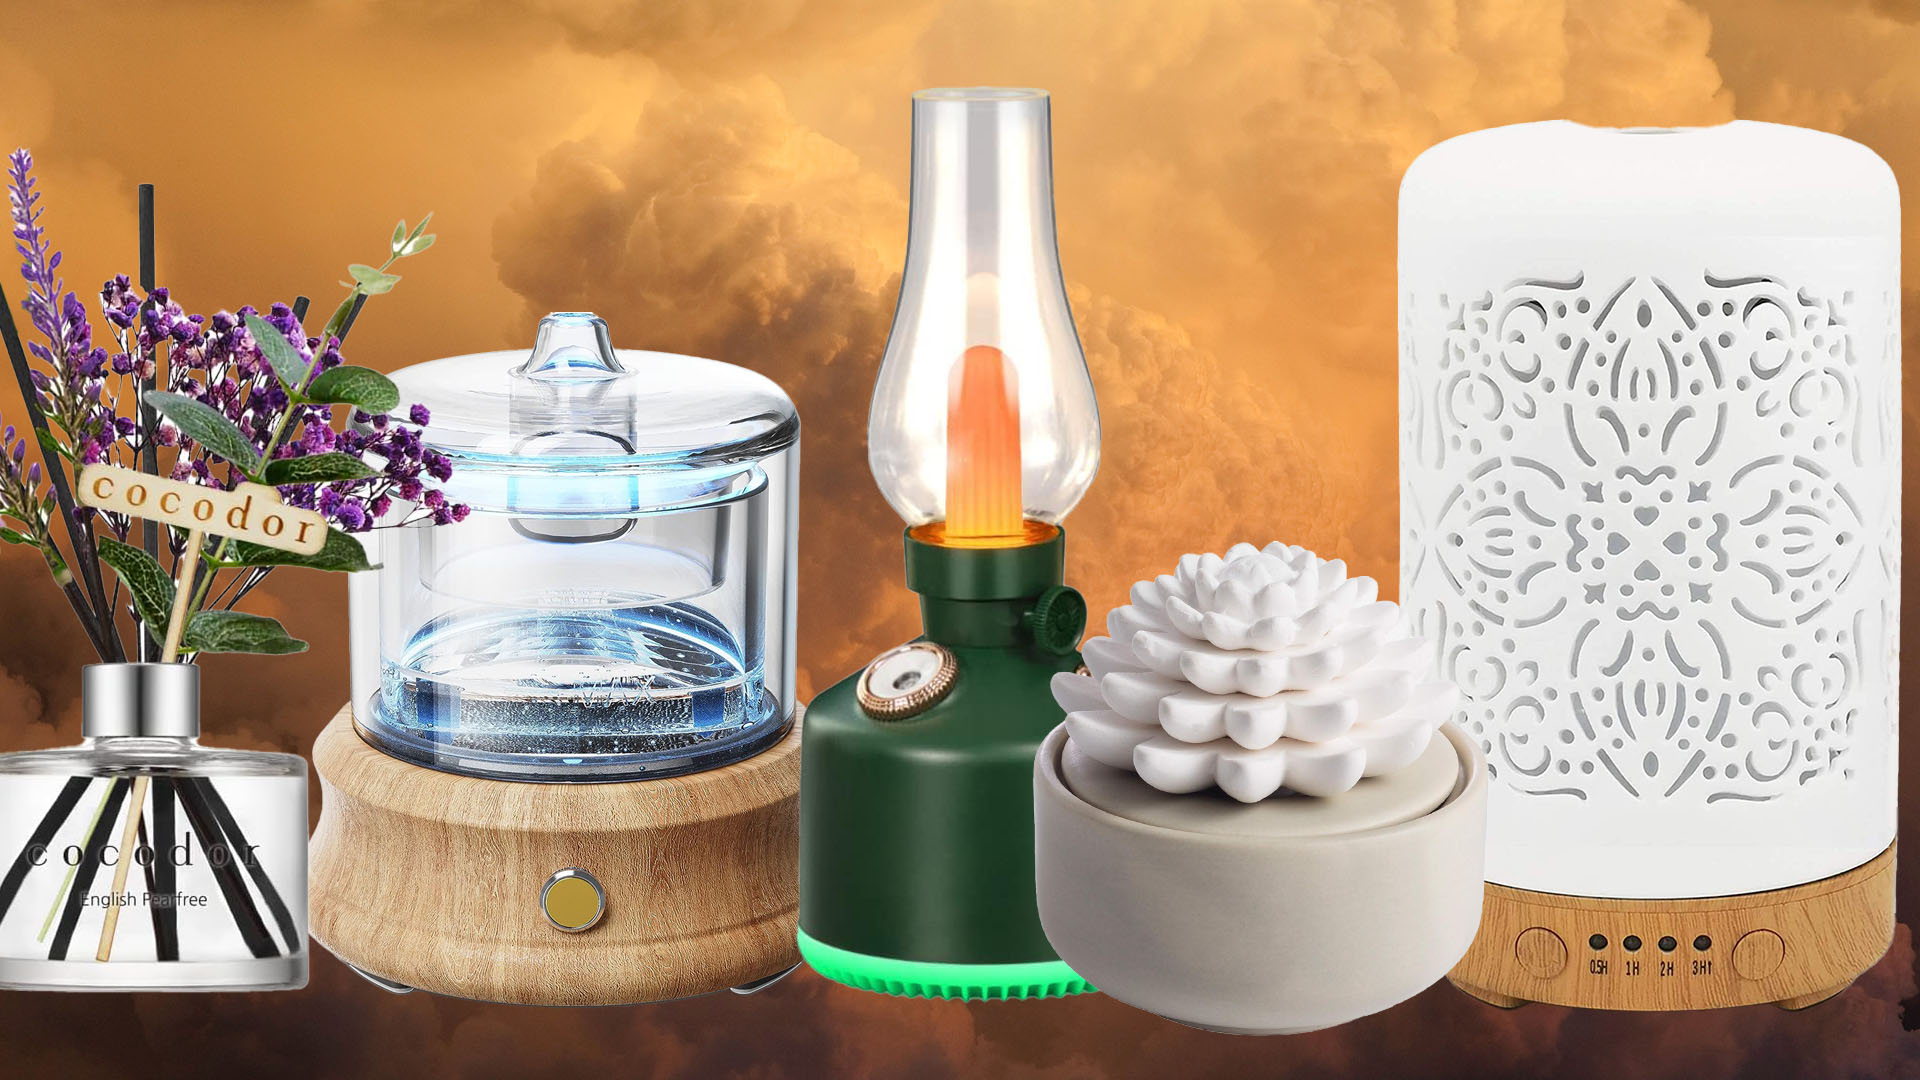 From Smart Diffusers To Basic Sets, These Are The Affordable